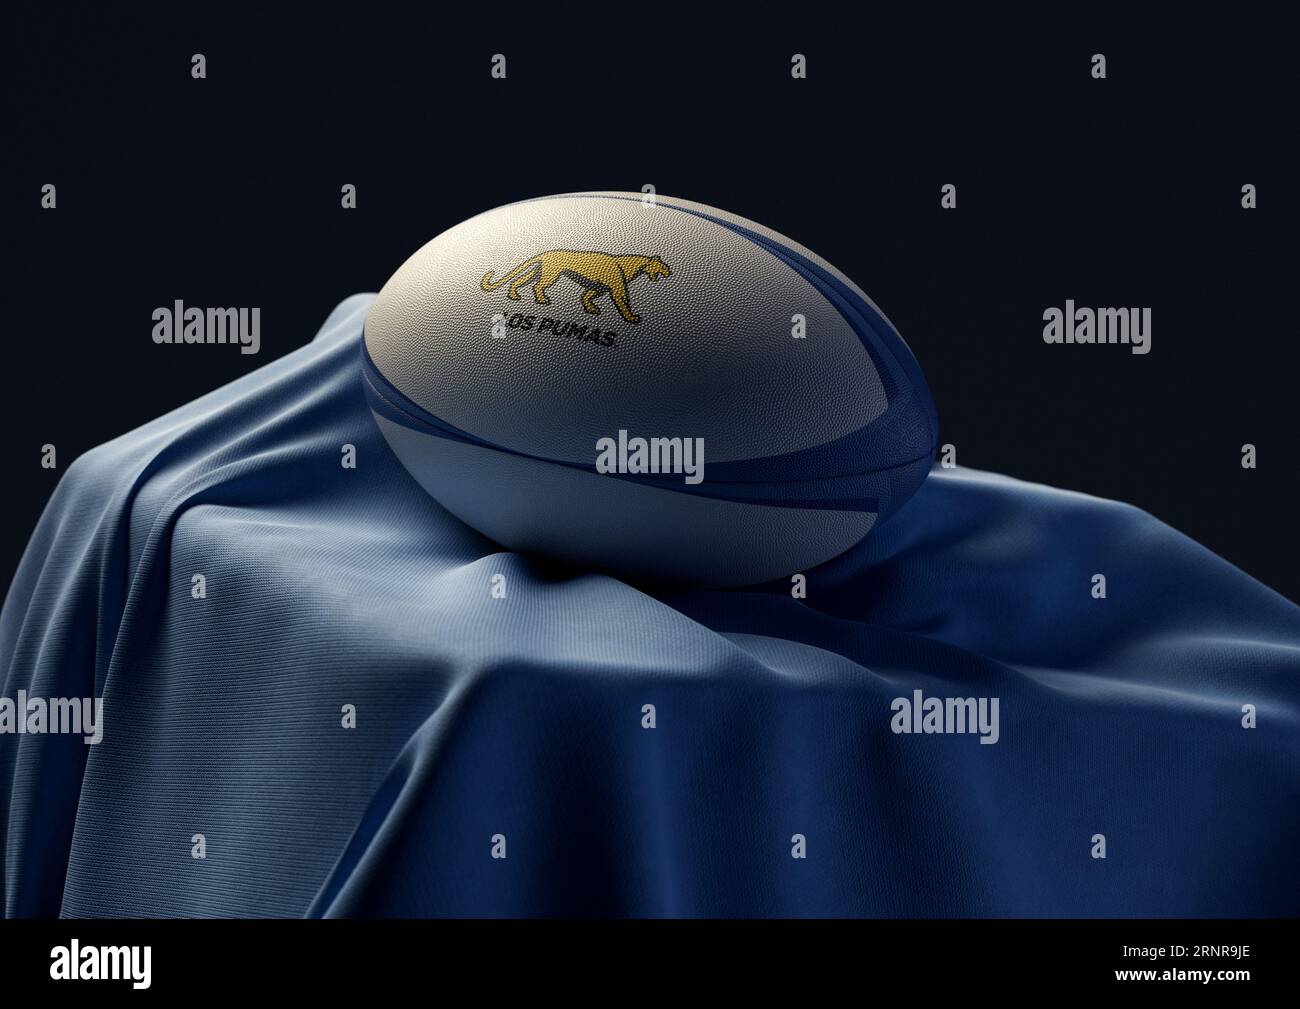 September 2, 2023 - Bristol, United Kingdom: A 3D render of a rugby ball imprinted with the Argentina rugby logo resting on a draped blue fabric Stock Photo